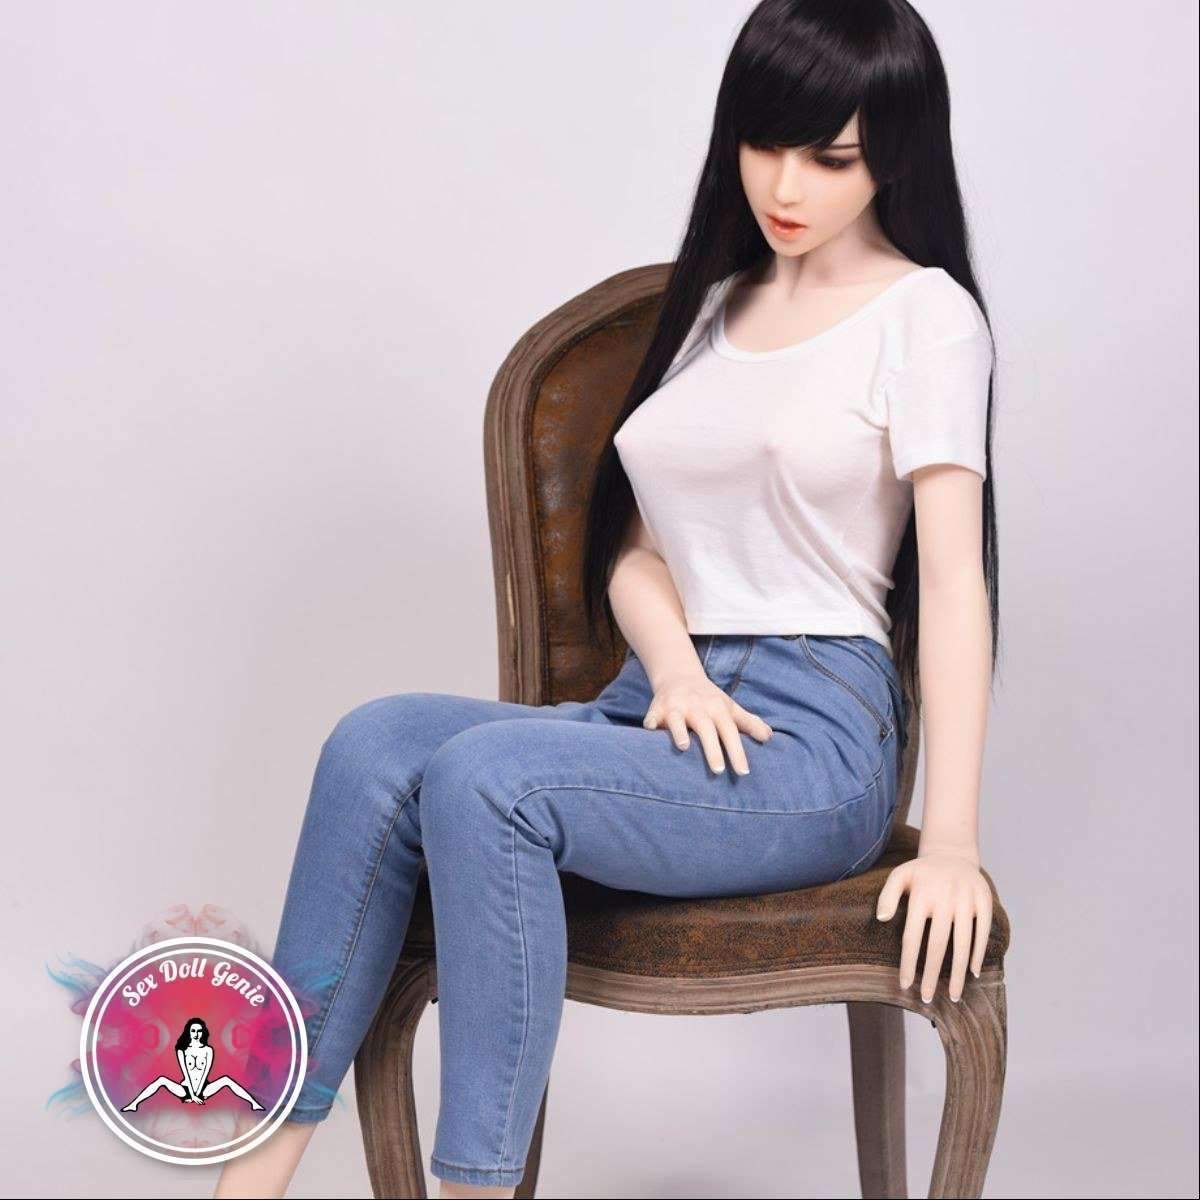 DS Doll - 163Plus - Kayla Head - Type 2 D Cup Silicone Doll-6